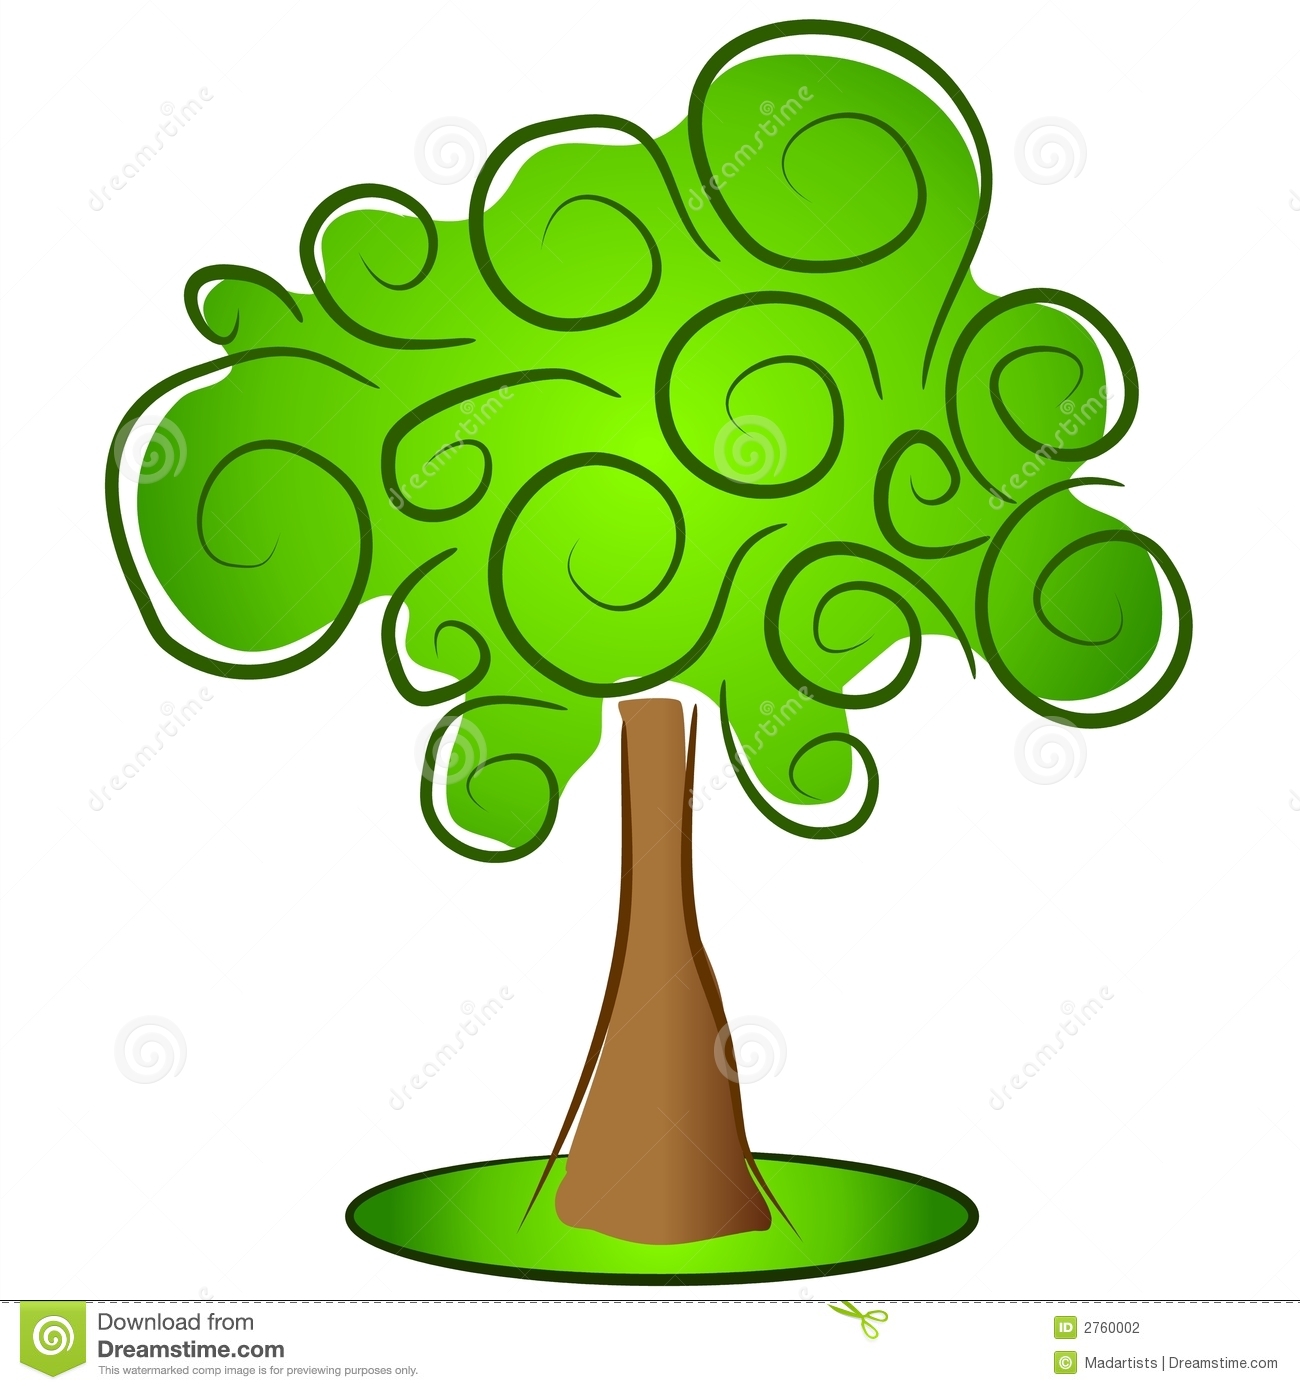 An Abstract Illustration Of A Large Tree With Green Swirling Branches